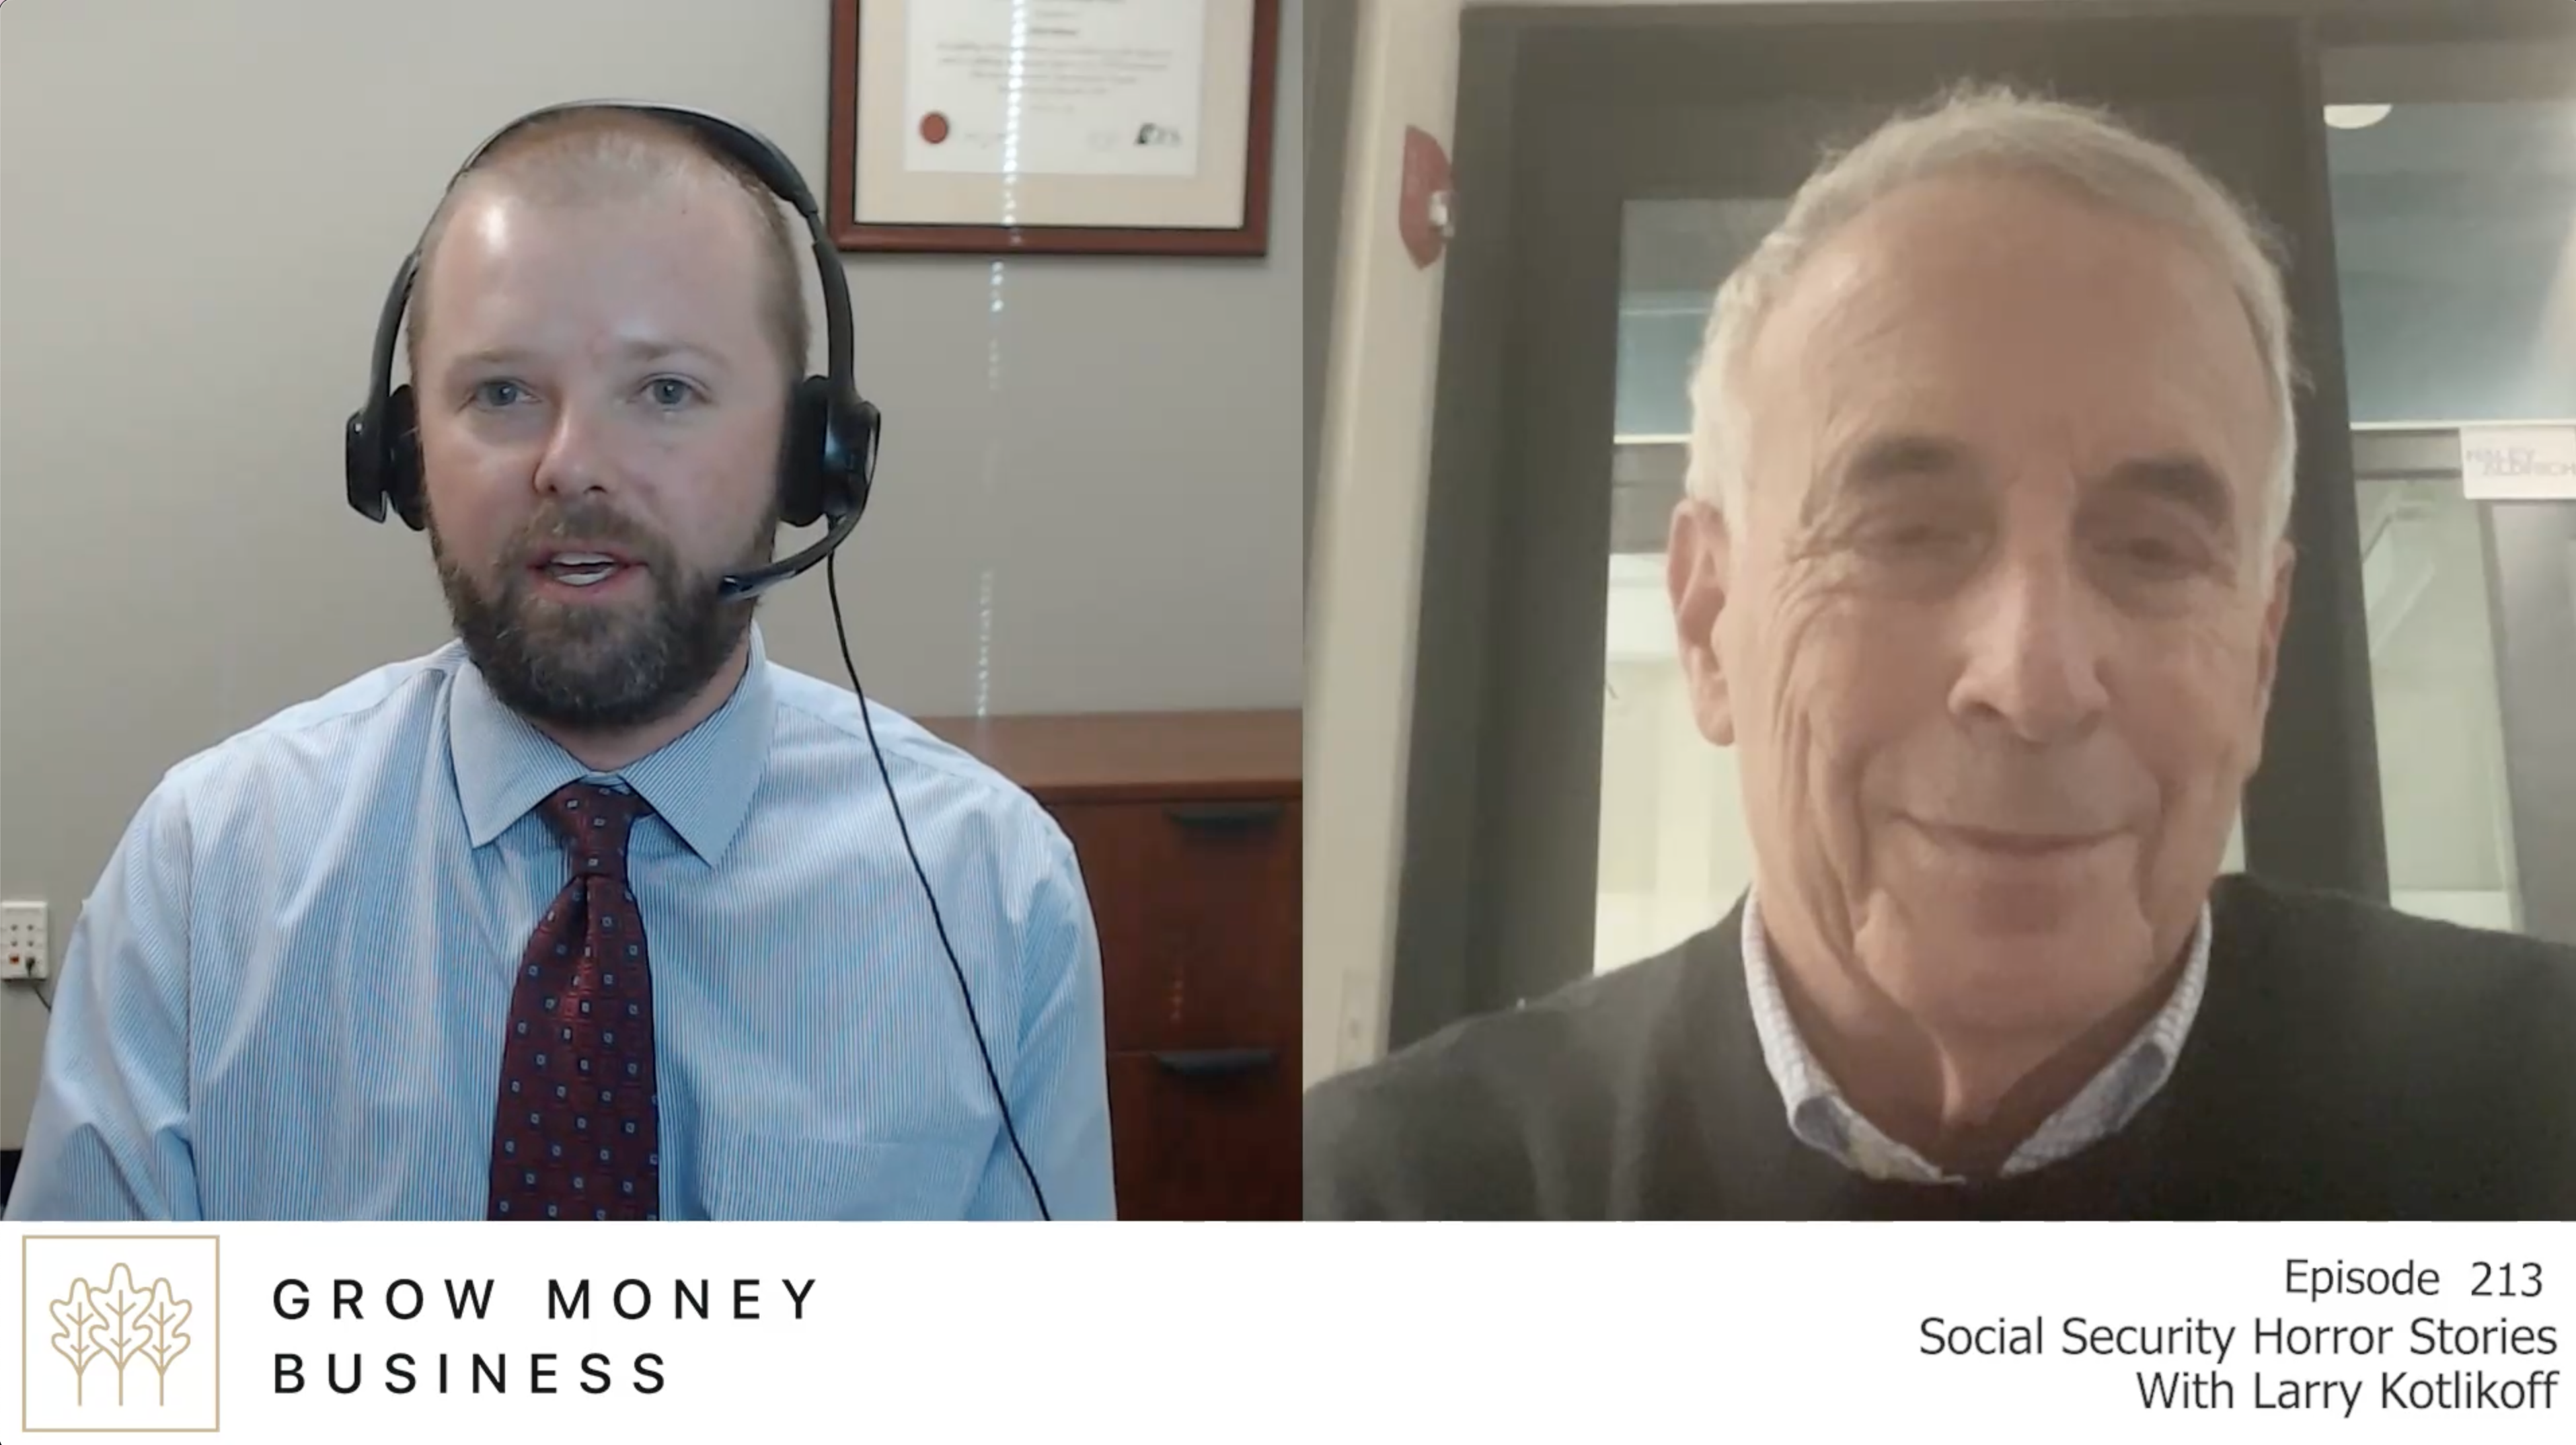 Social Security Horror Stories with Laurence Kotlikoff l Ep 213 main image